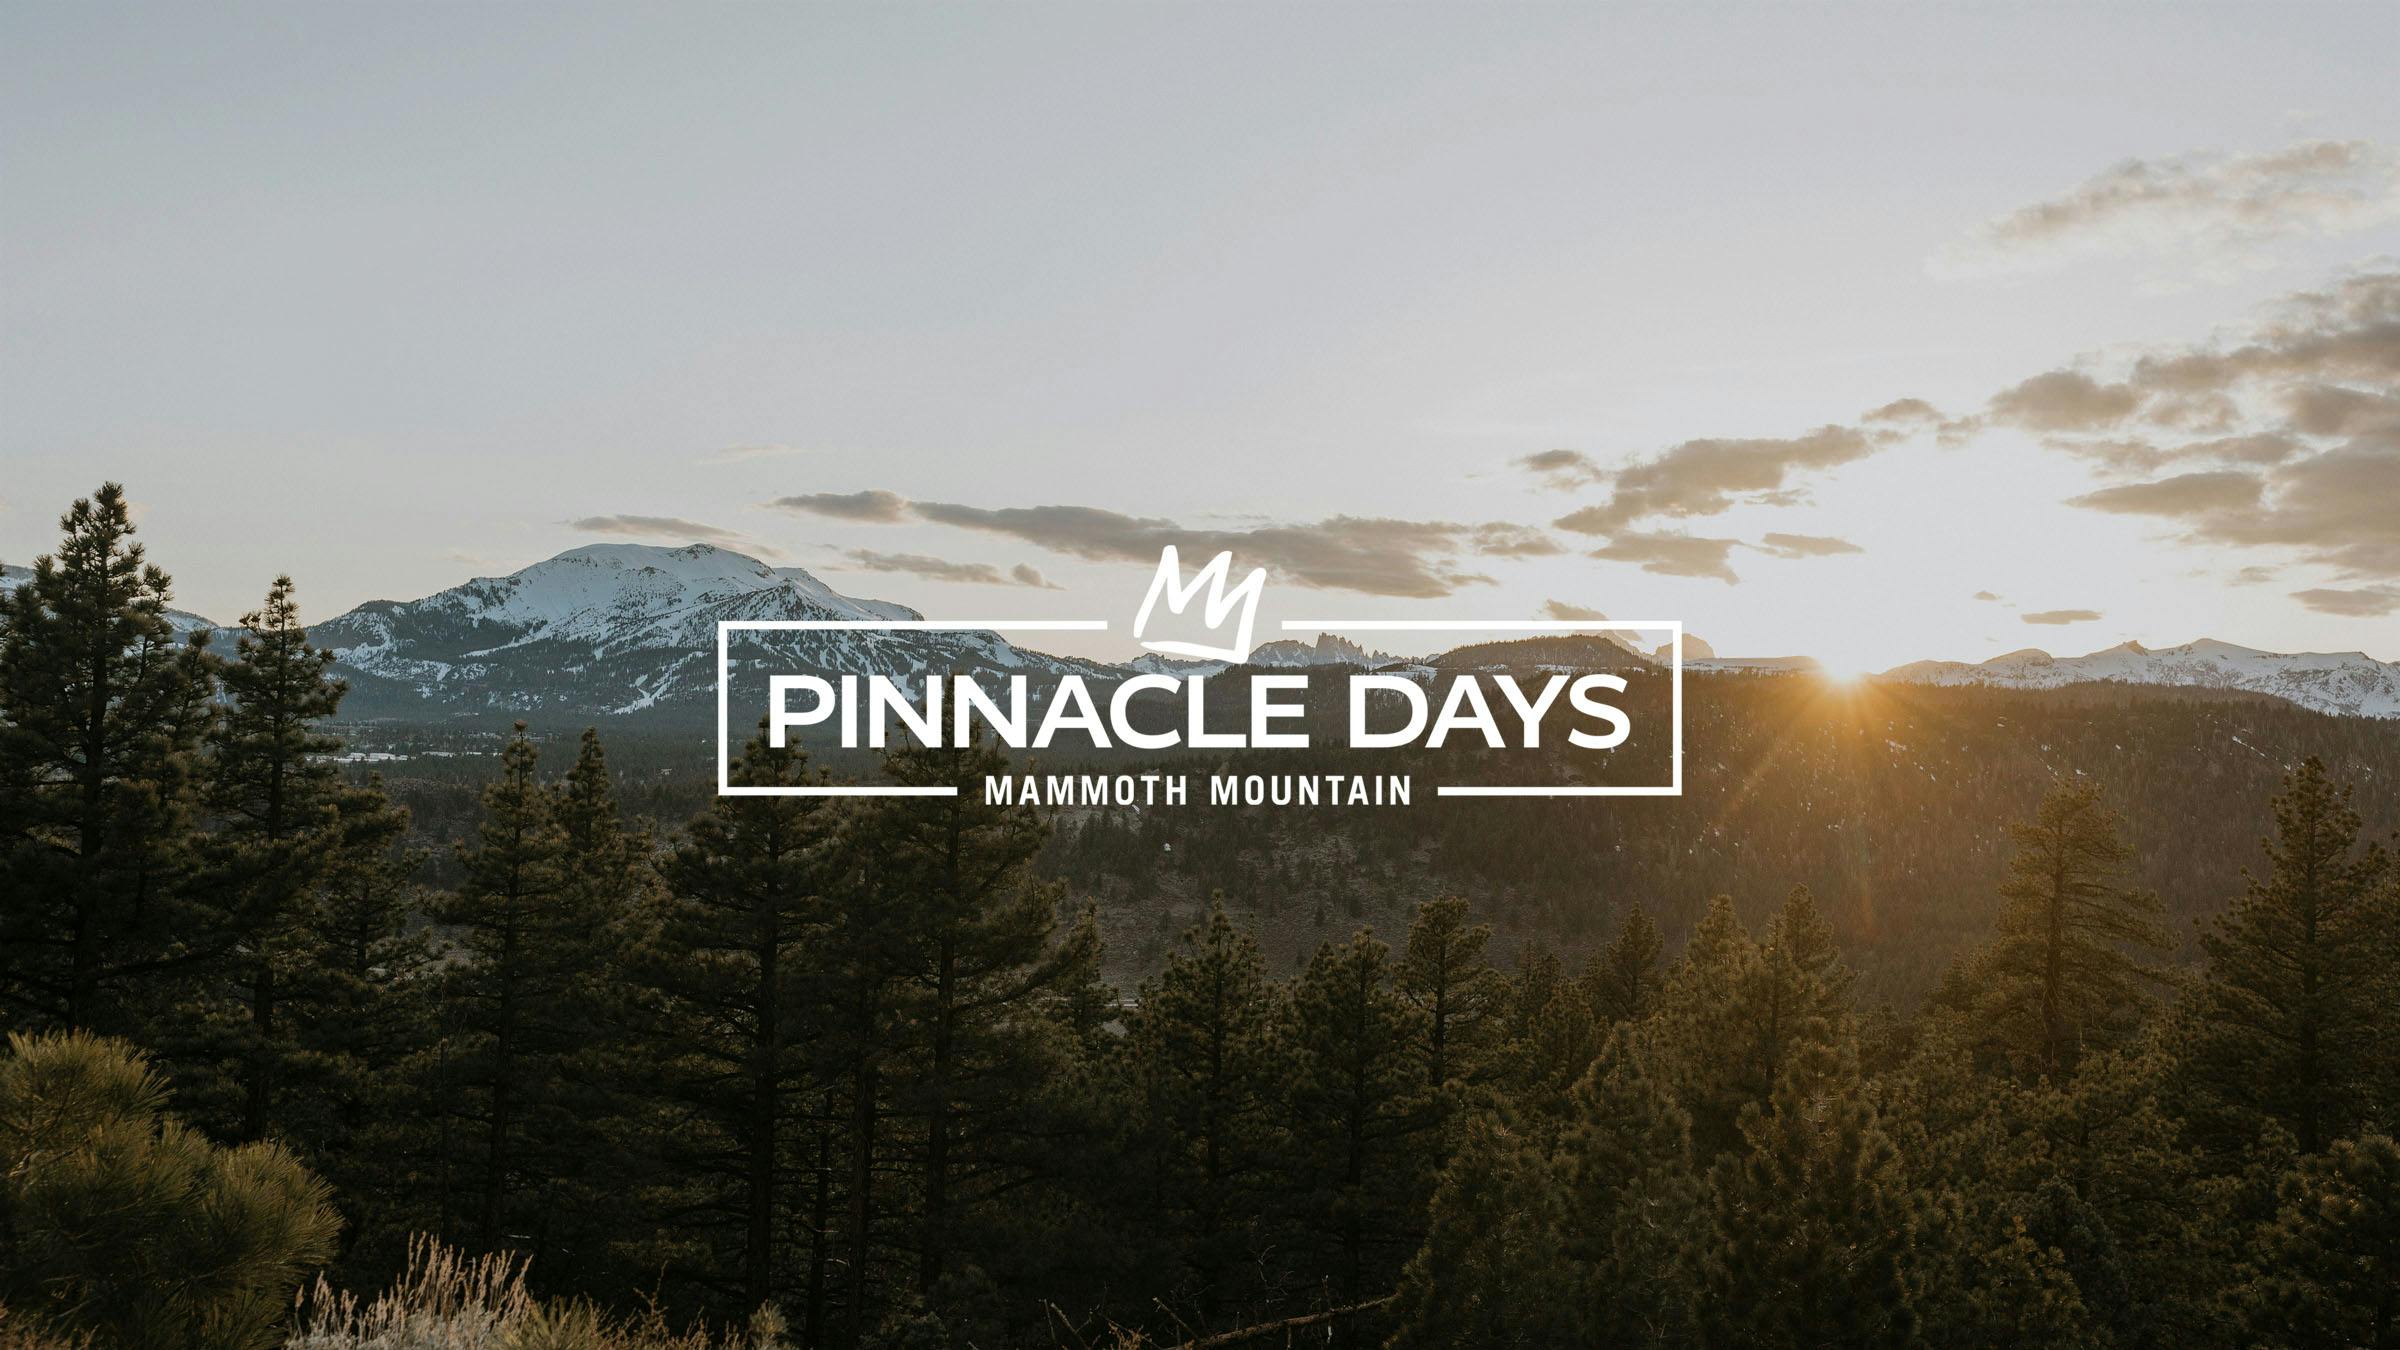 Pinnacle Days logo with scenic photo of Mammoth Mountain